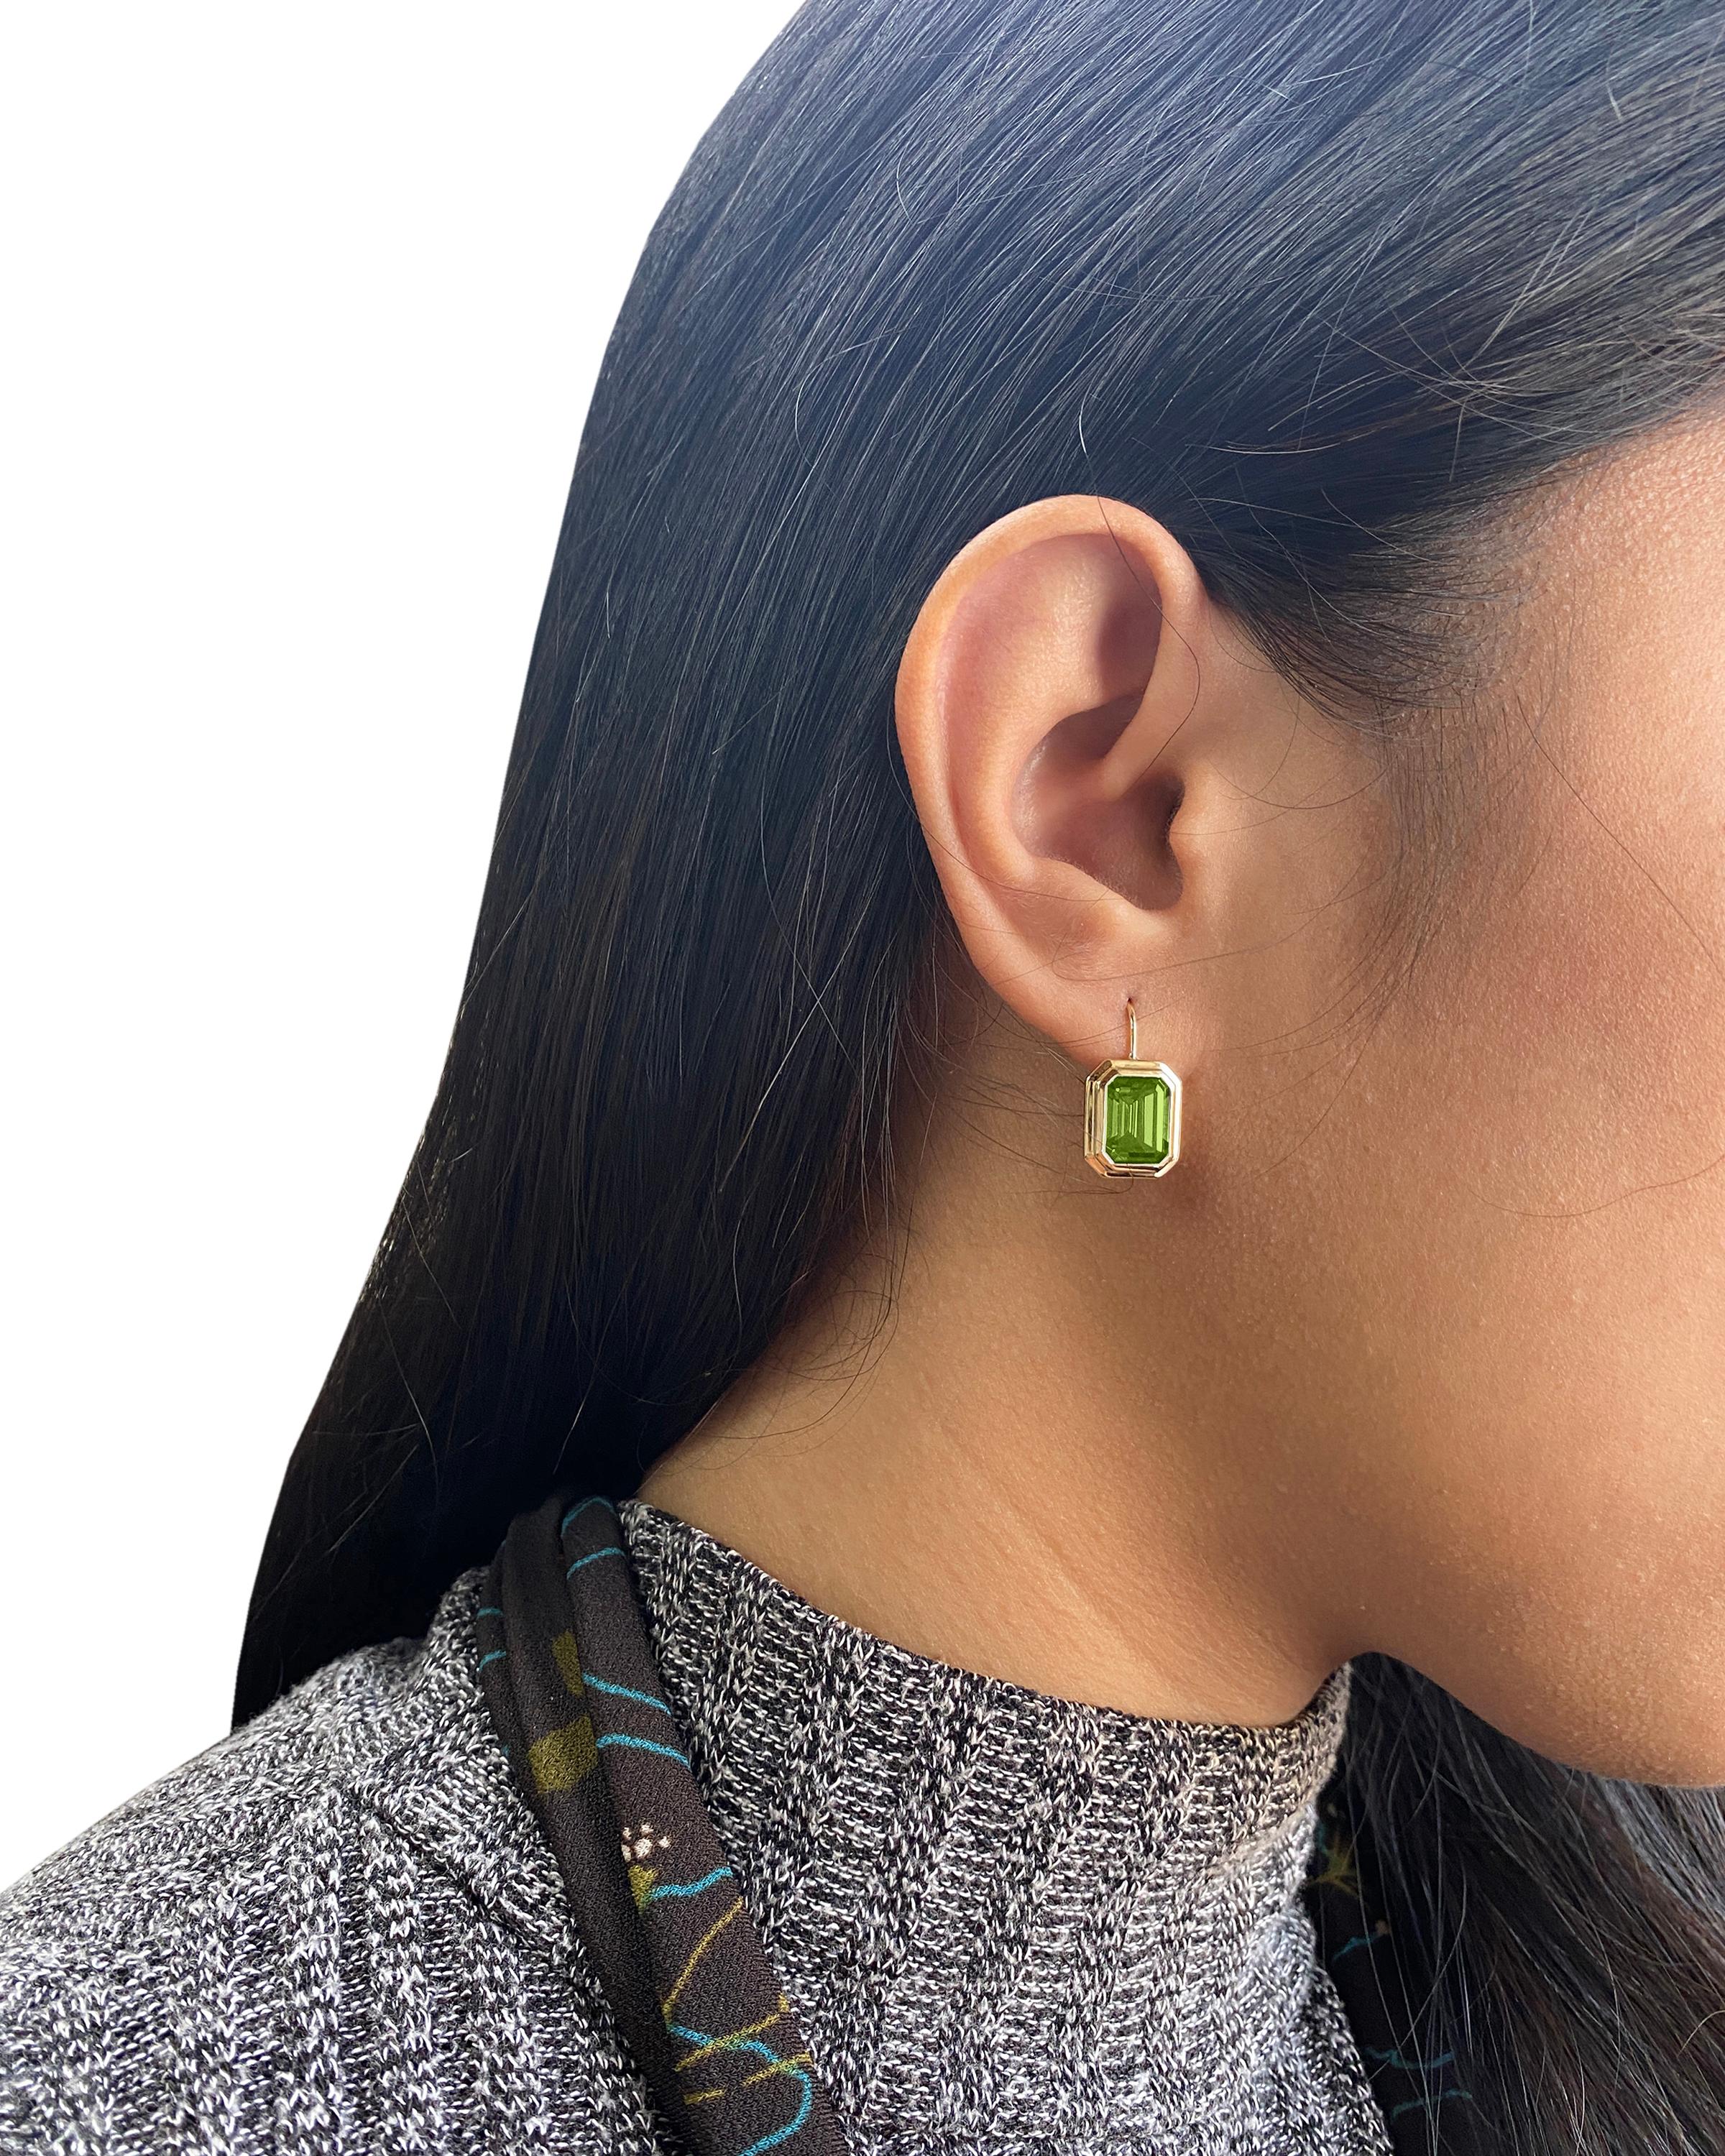 These Peridot Emerald Cut Bezel Set Earrings on Wire in 18K Yellow Gold from the 'Manhattan Collection are a stunning and sophisticated jewelry piece. These earrings feature exquisite Peridot gemstones with an elegant emerald cut, cradled in a